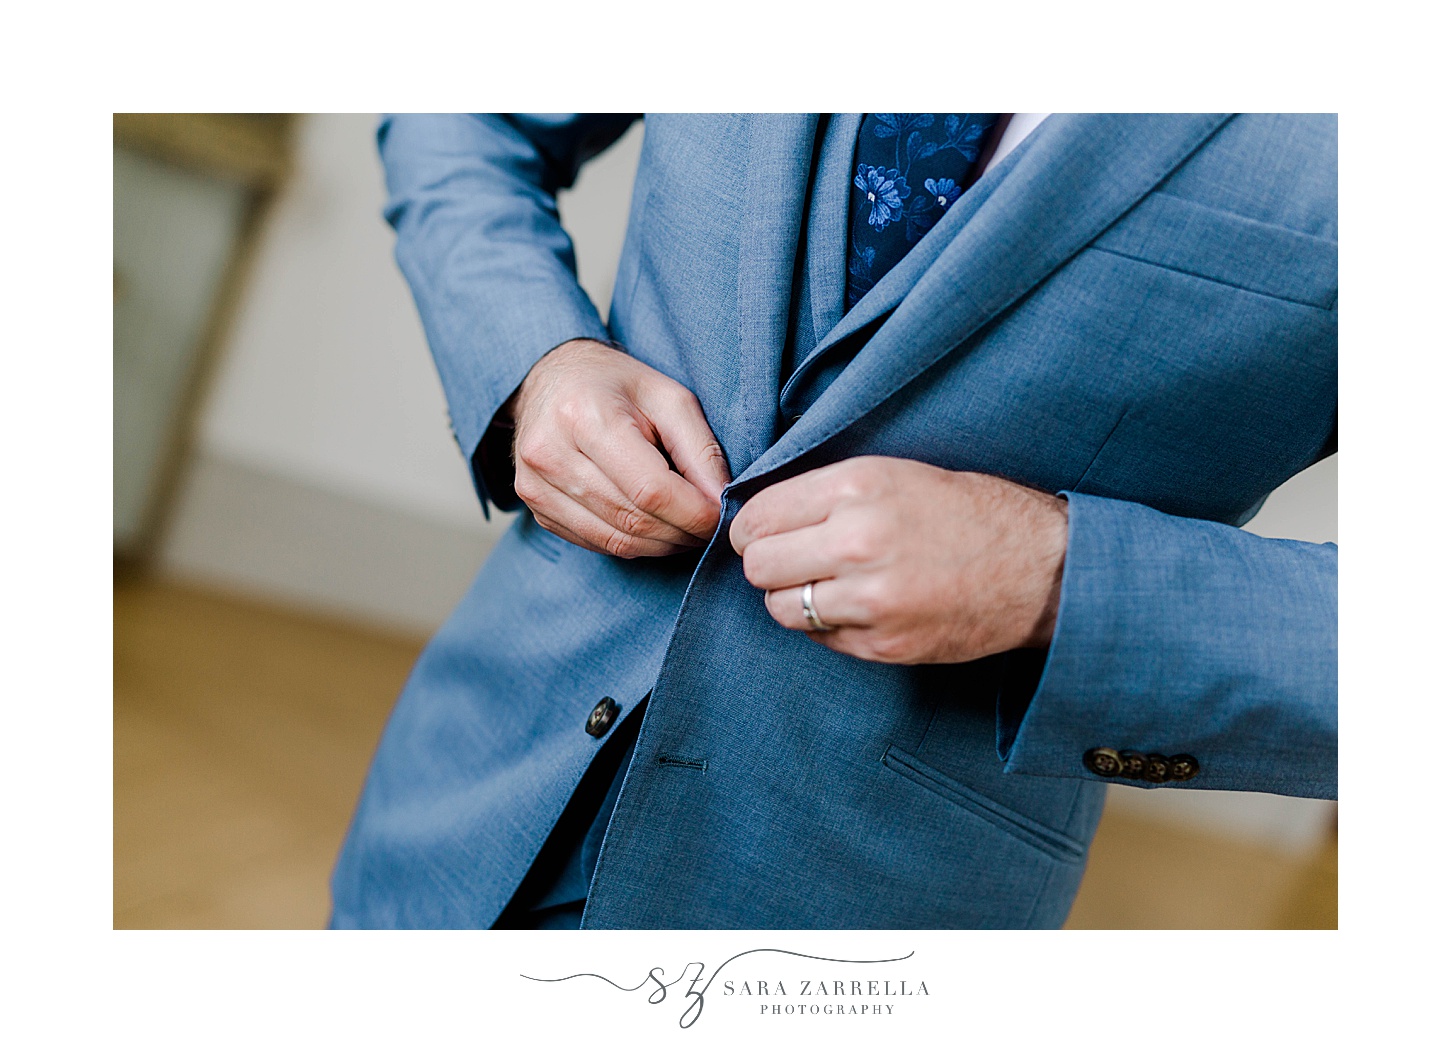 groom buttons jacket on blue suit before Rosecliff Mansion wedding